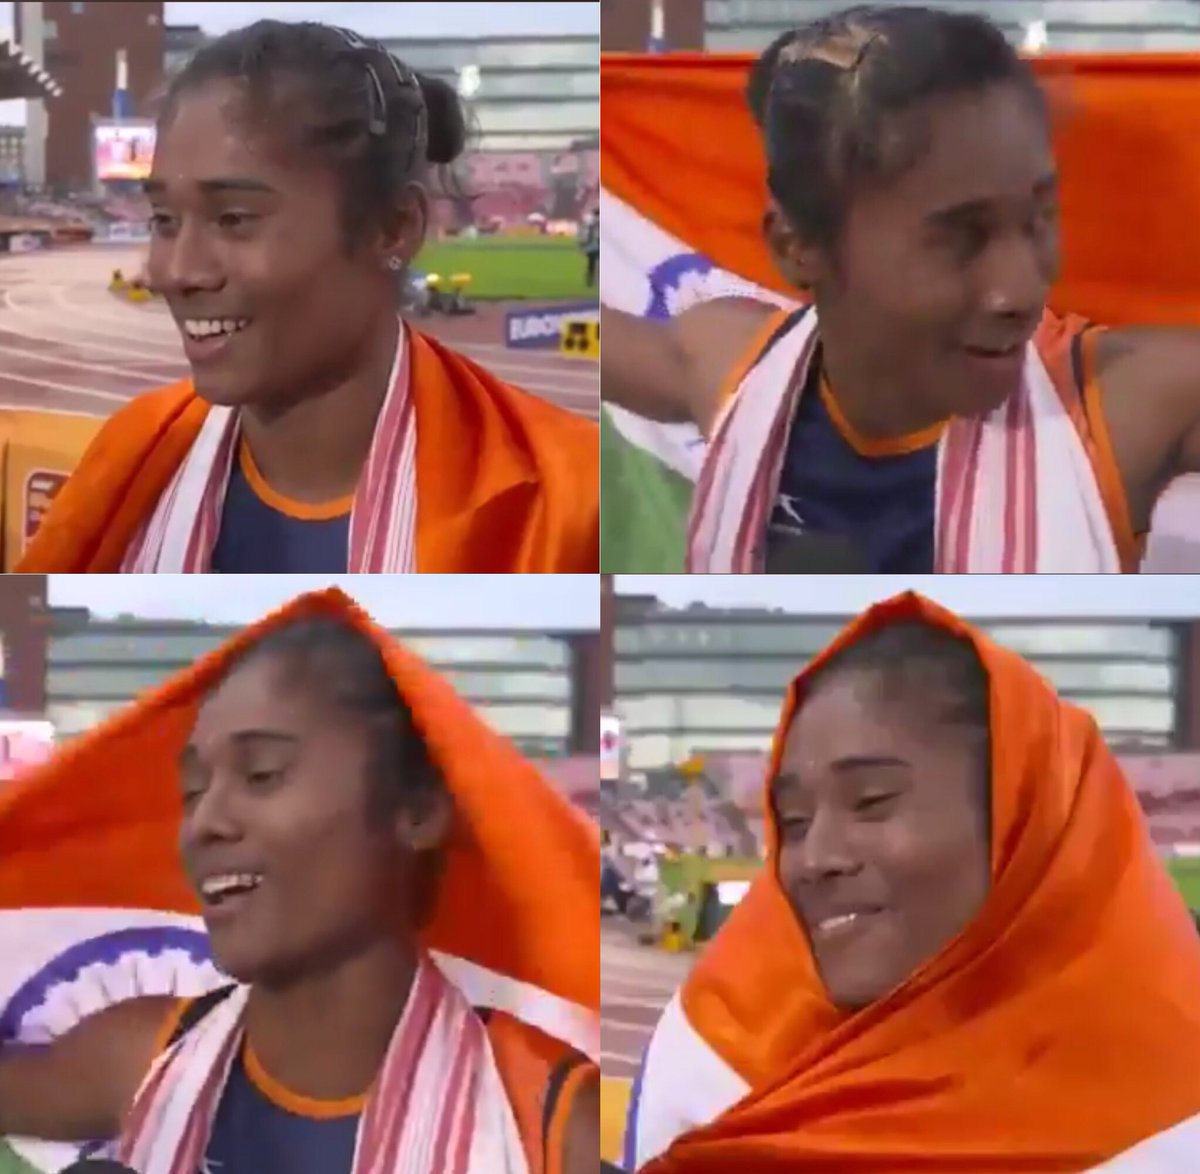 Hima Das Becomes First Indian Woman To Win GOLD at Athletics Junior World Championships